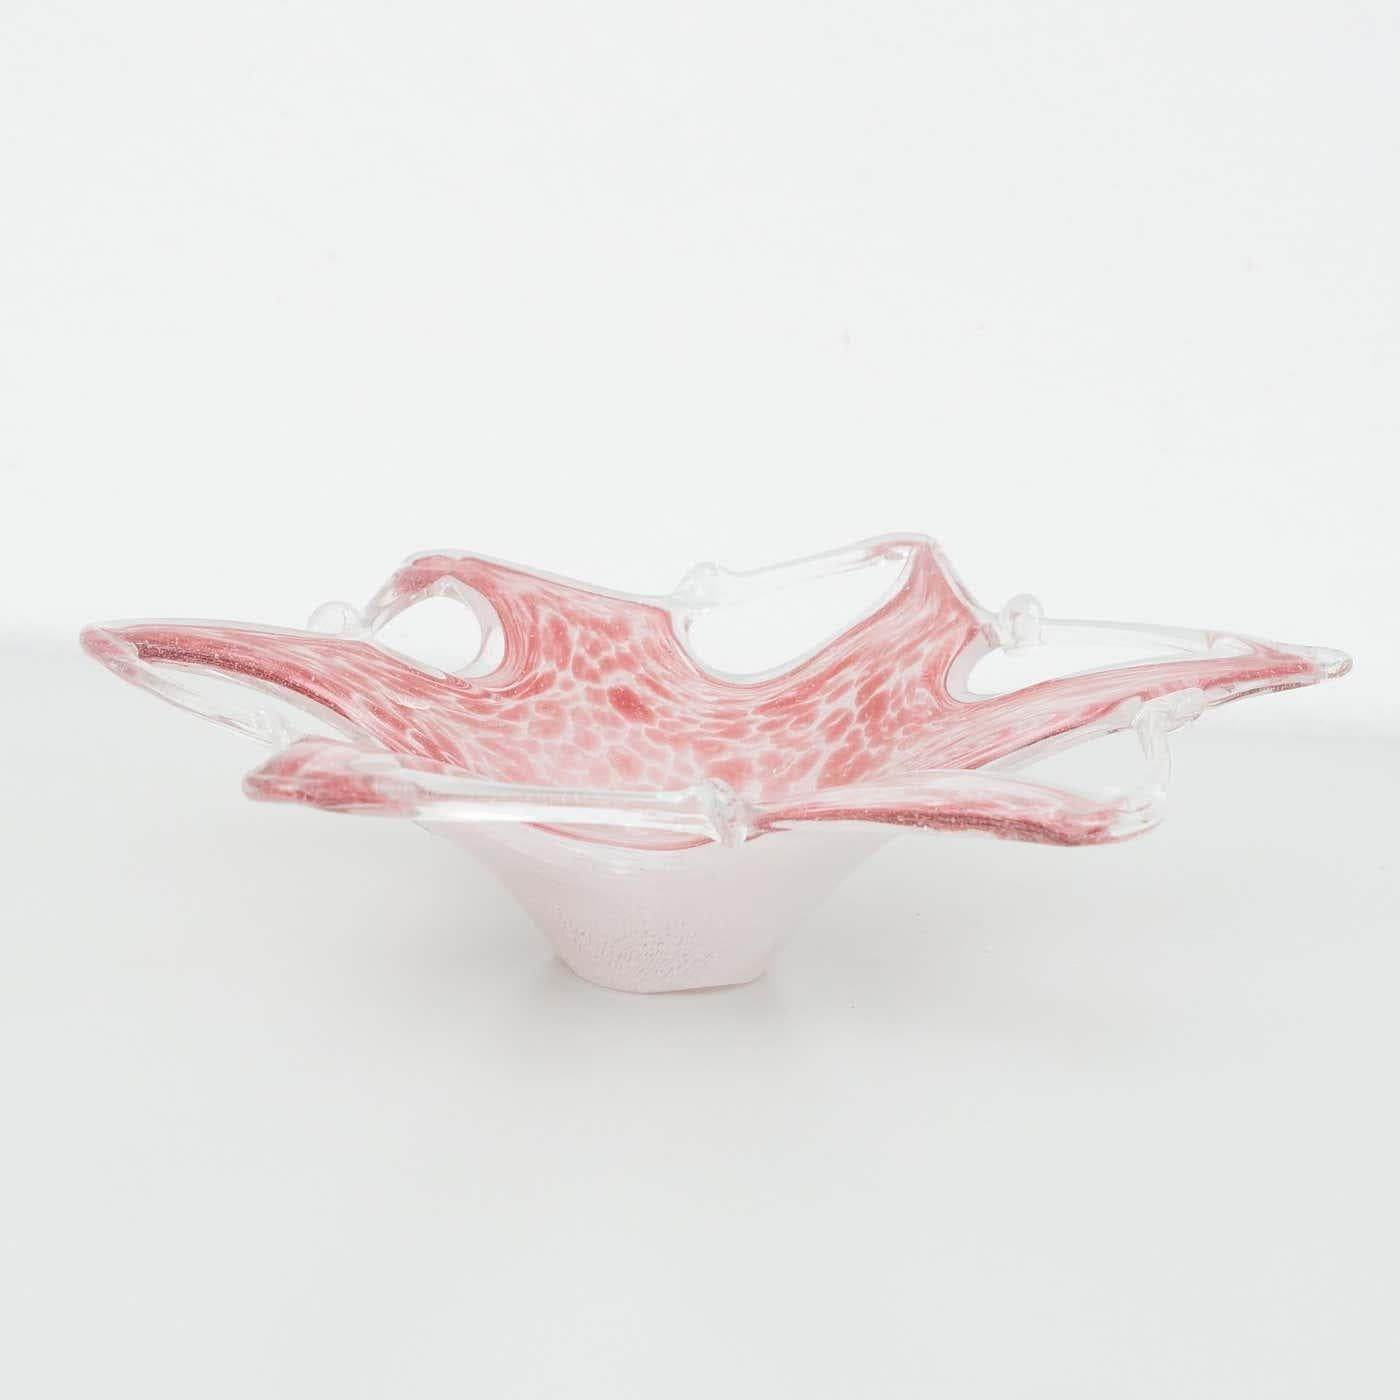 Pink murano glass vase, circa 1970
Manufactured in Italy.

In original condition, with minor wear consistent of age and use, preserving a beautiful patina.